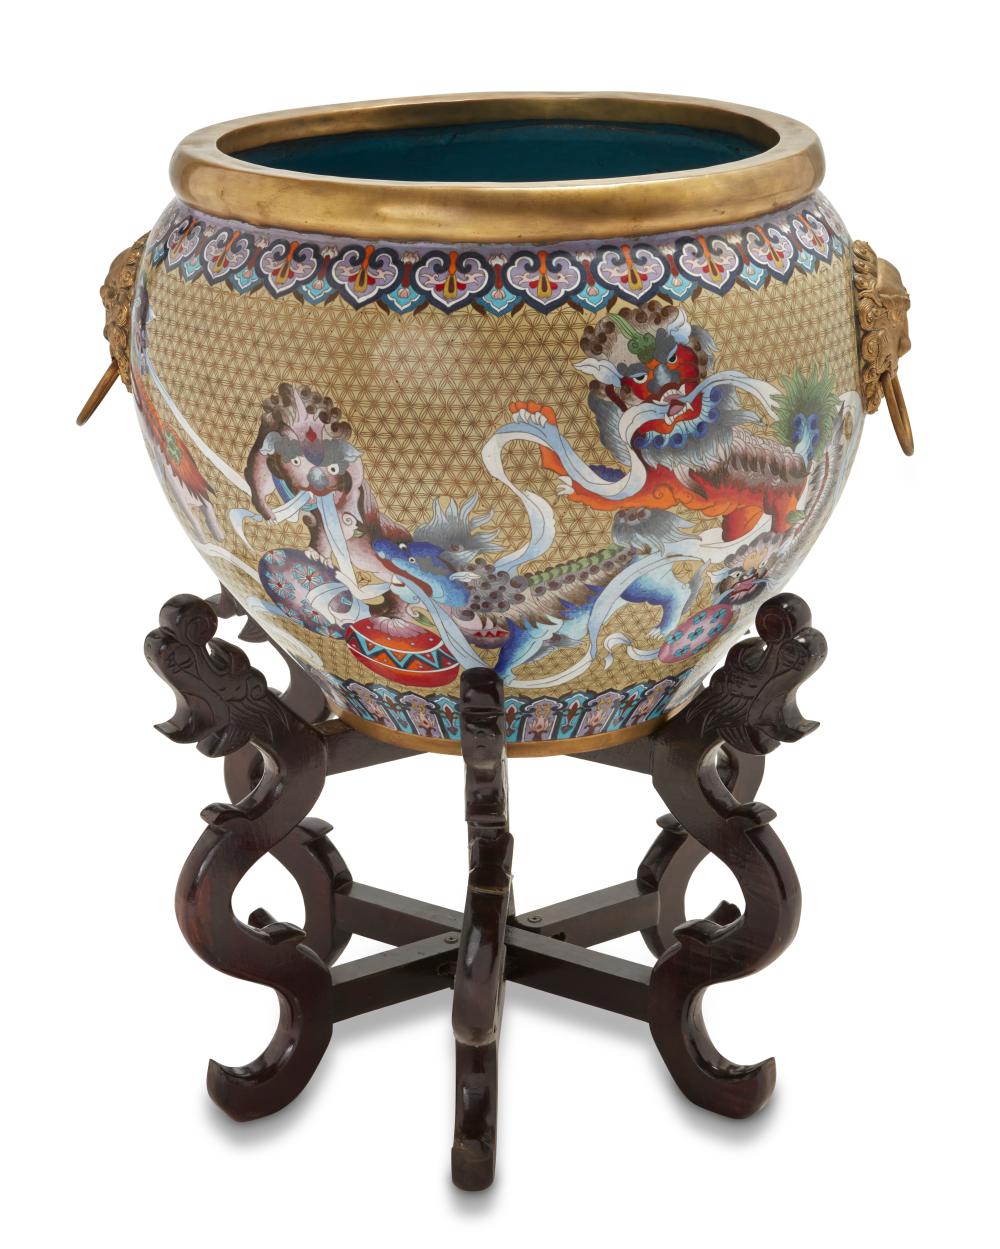 A LARGE CHINESE CLOISONN JARDINI RE 2ee978